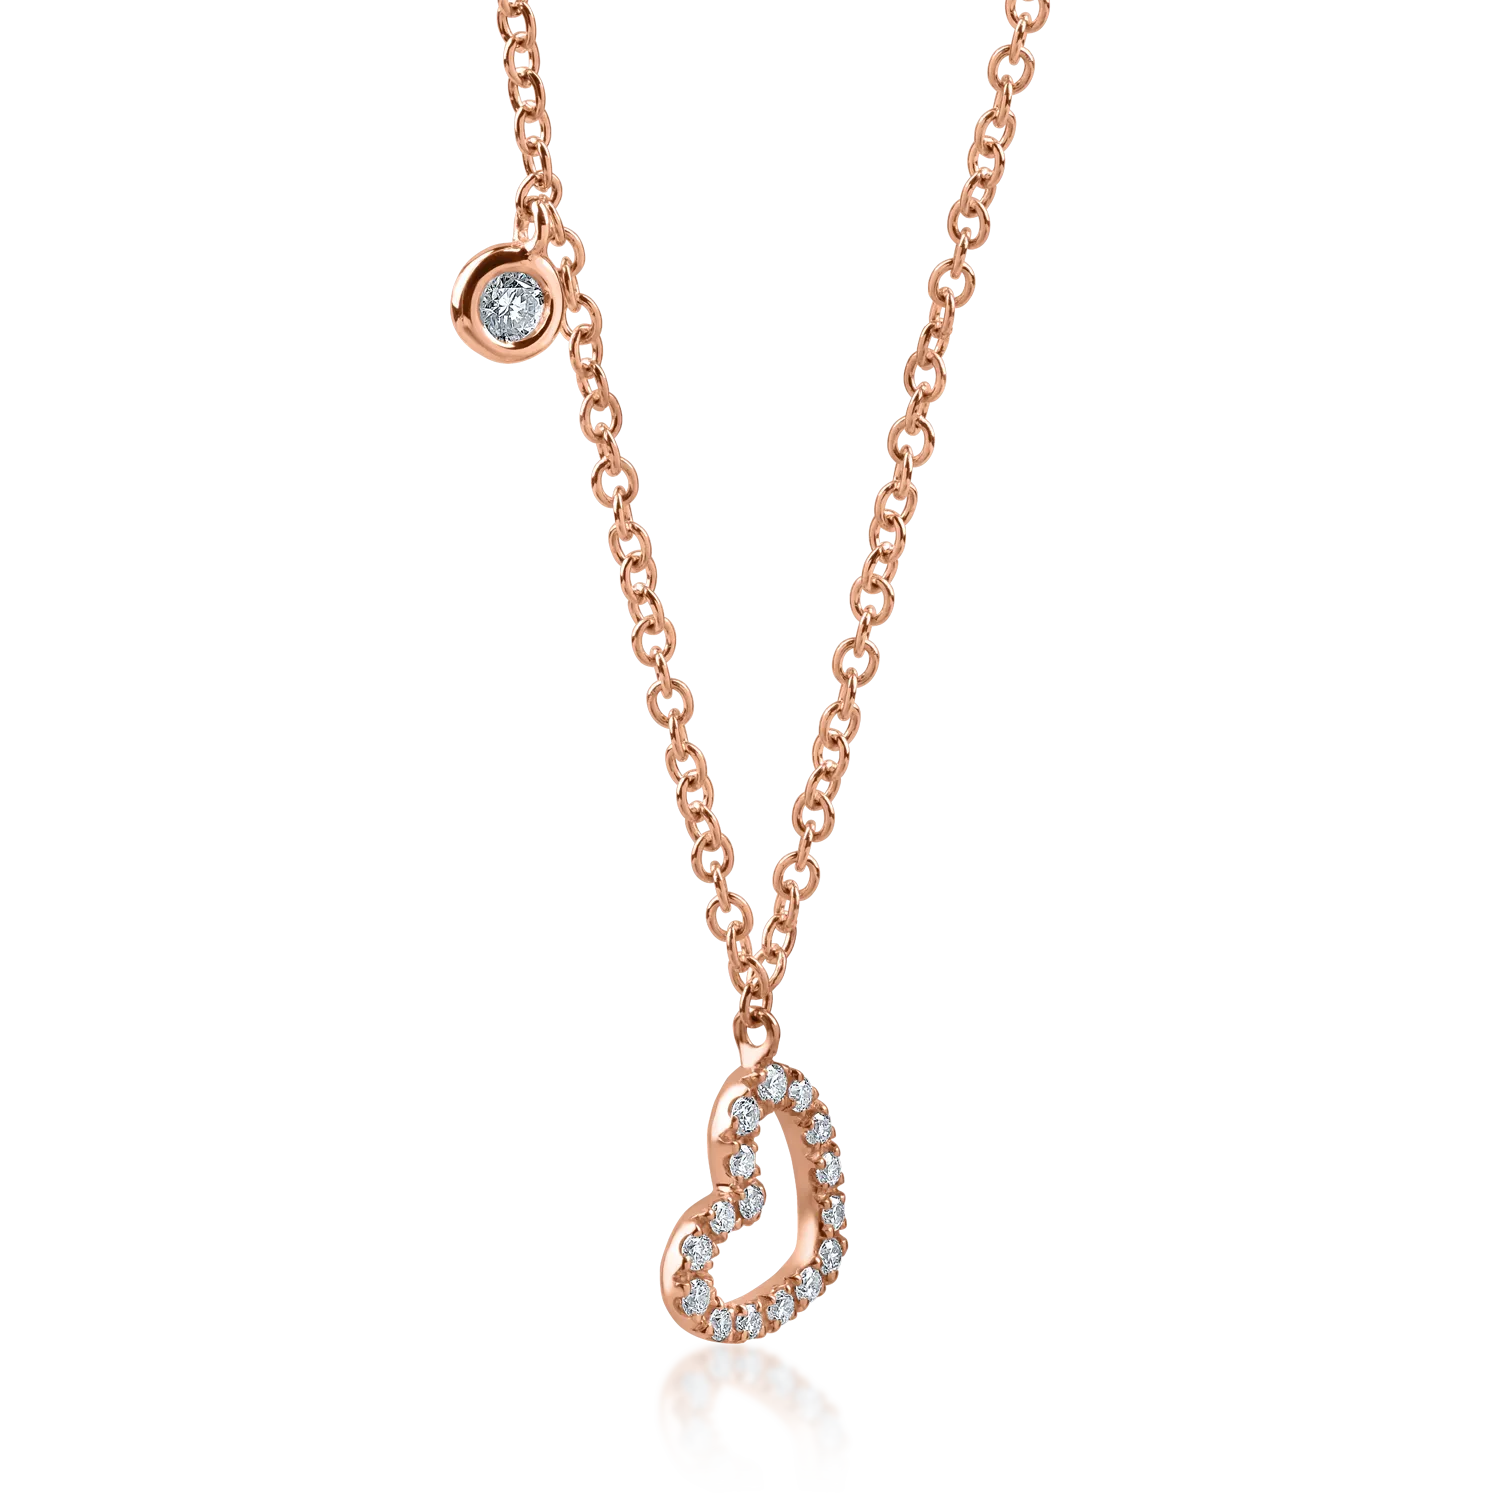 Rose gold heart pendant necklace with 0.11ct diamonds